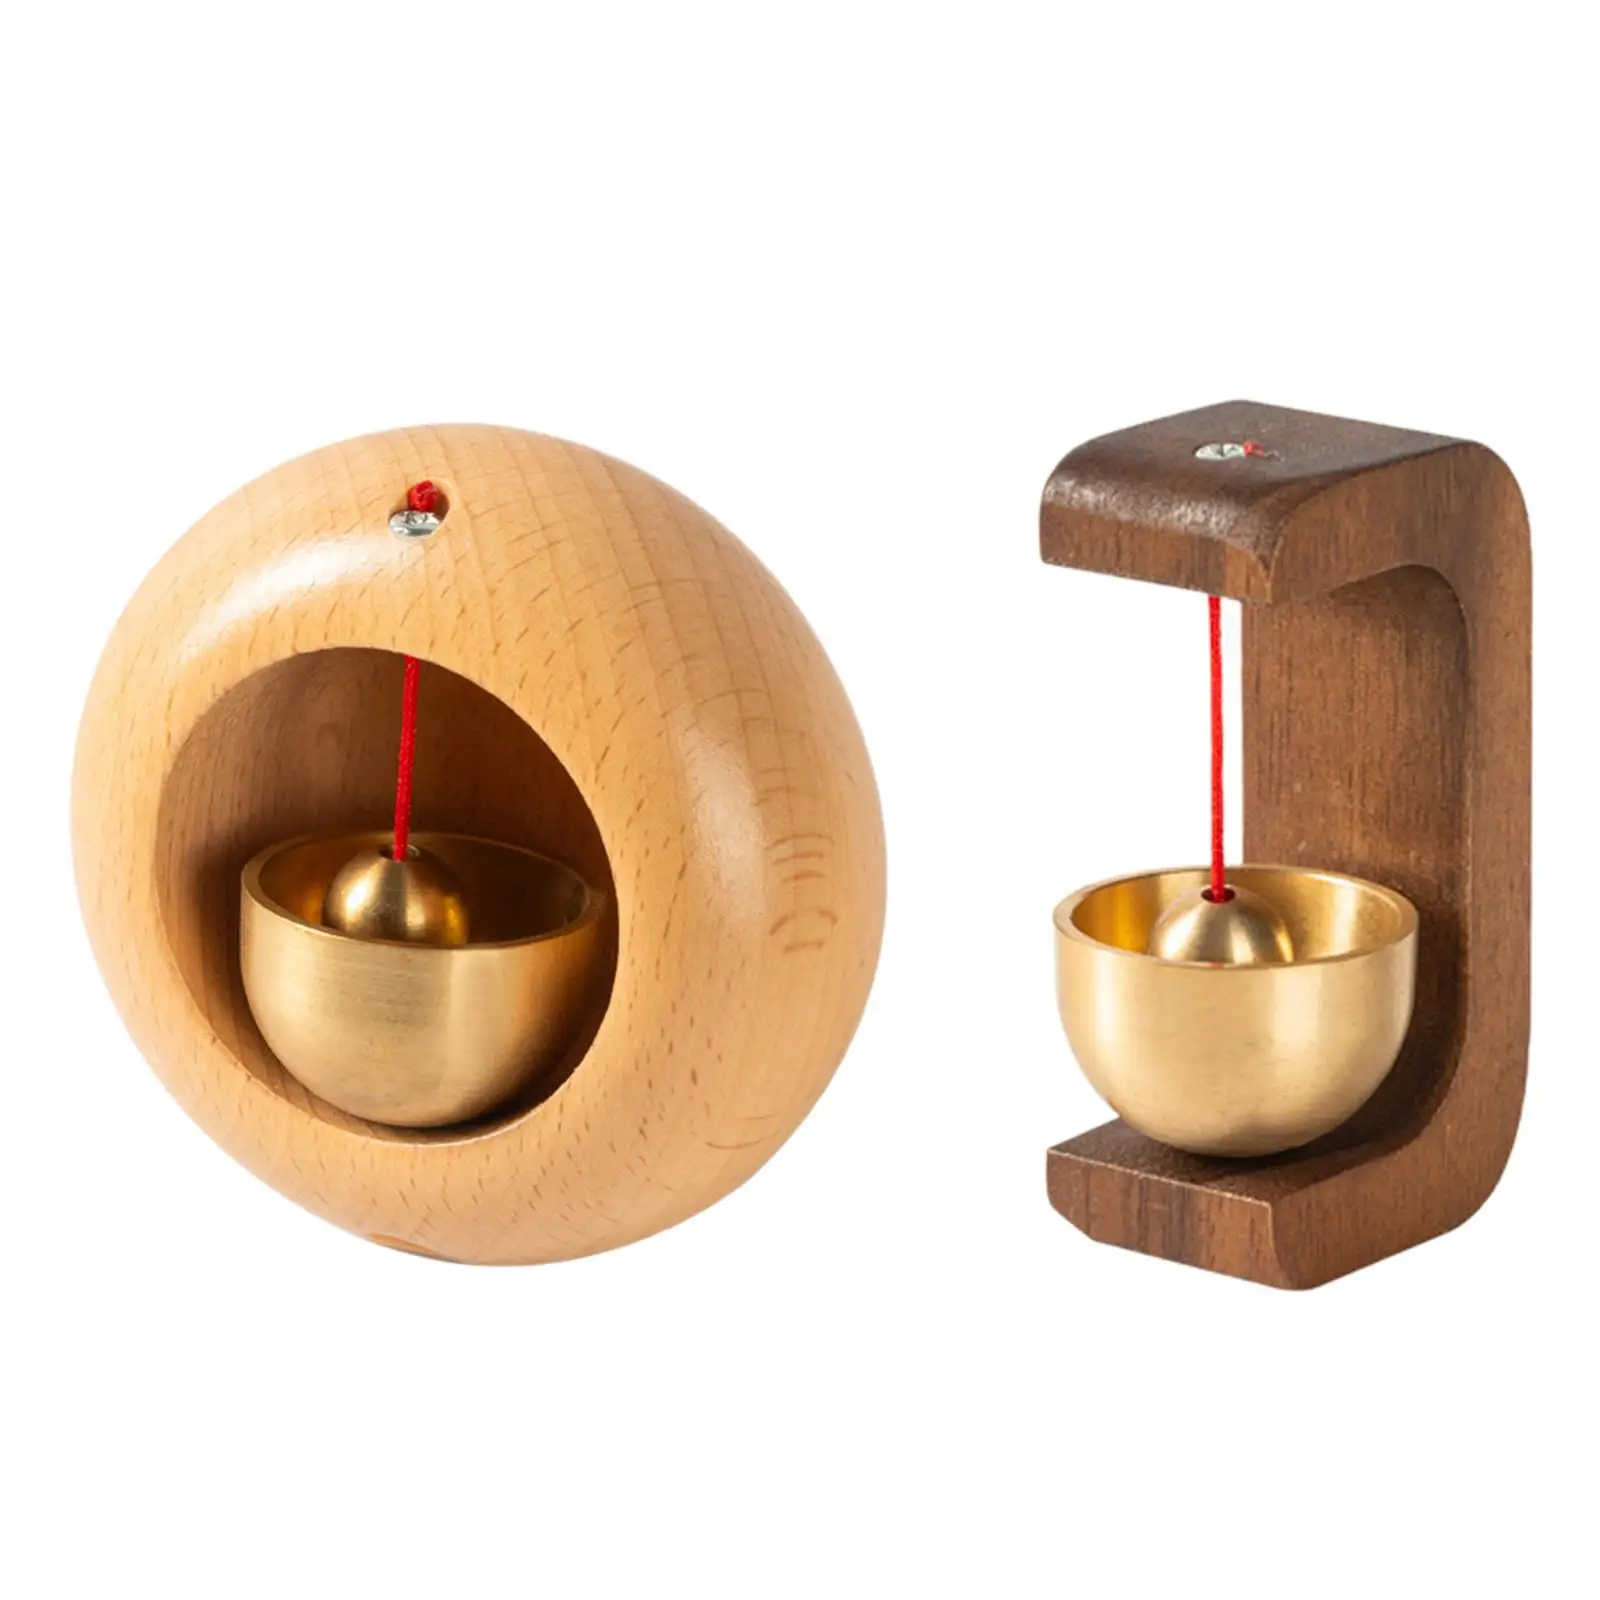 Shopkeepers Bell Welcome Wind Chime Hanging Decoration Japanese Style Door Chime Wood Doorbell for Restaurants Porches Stores